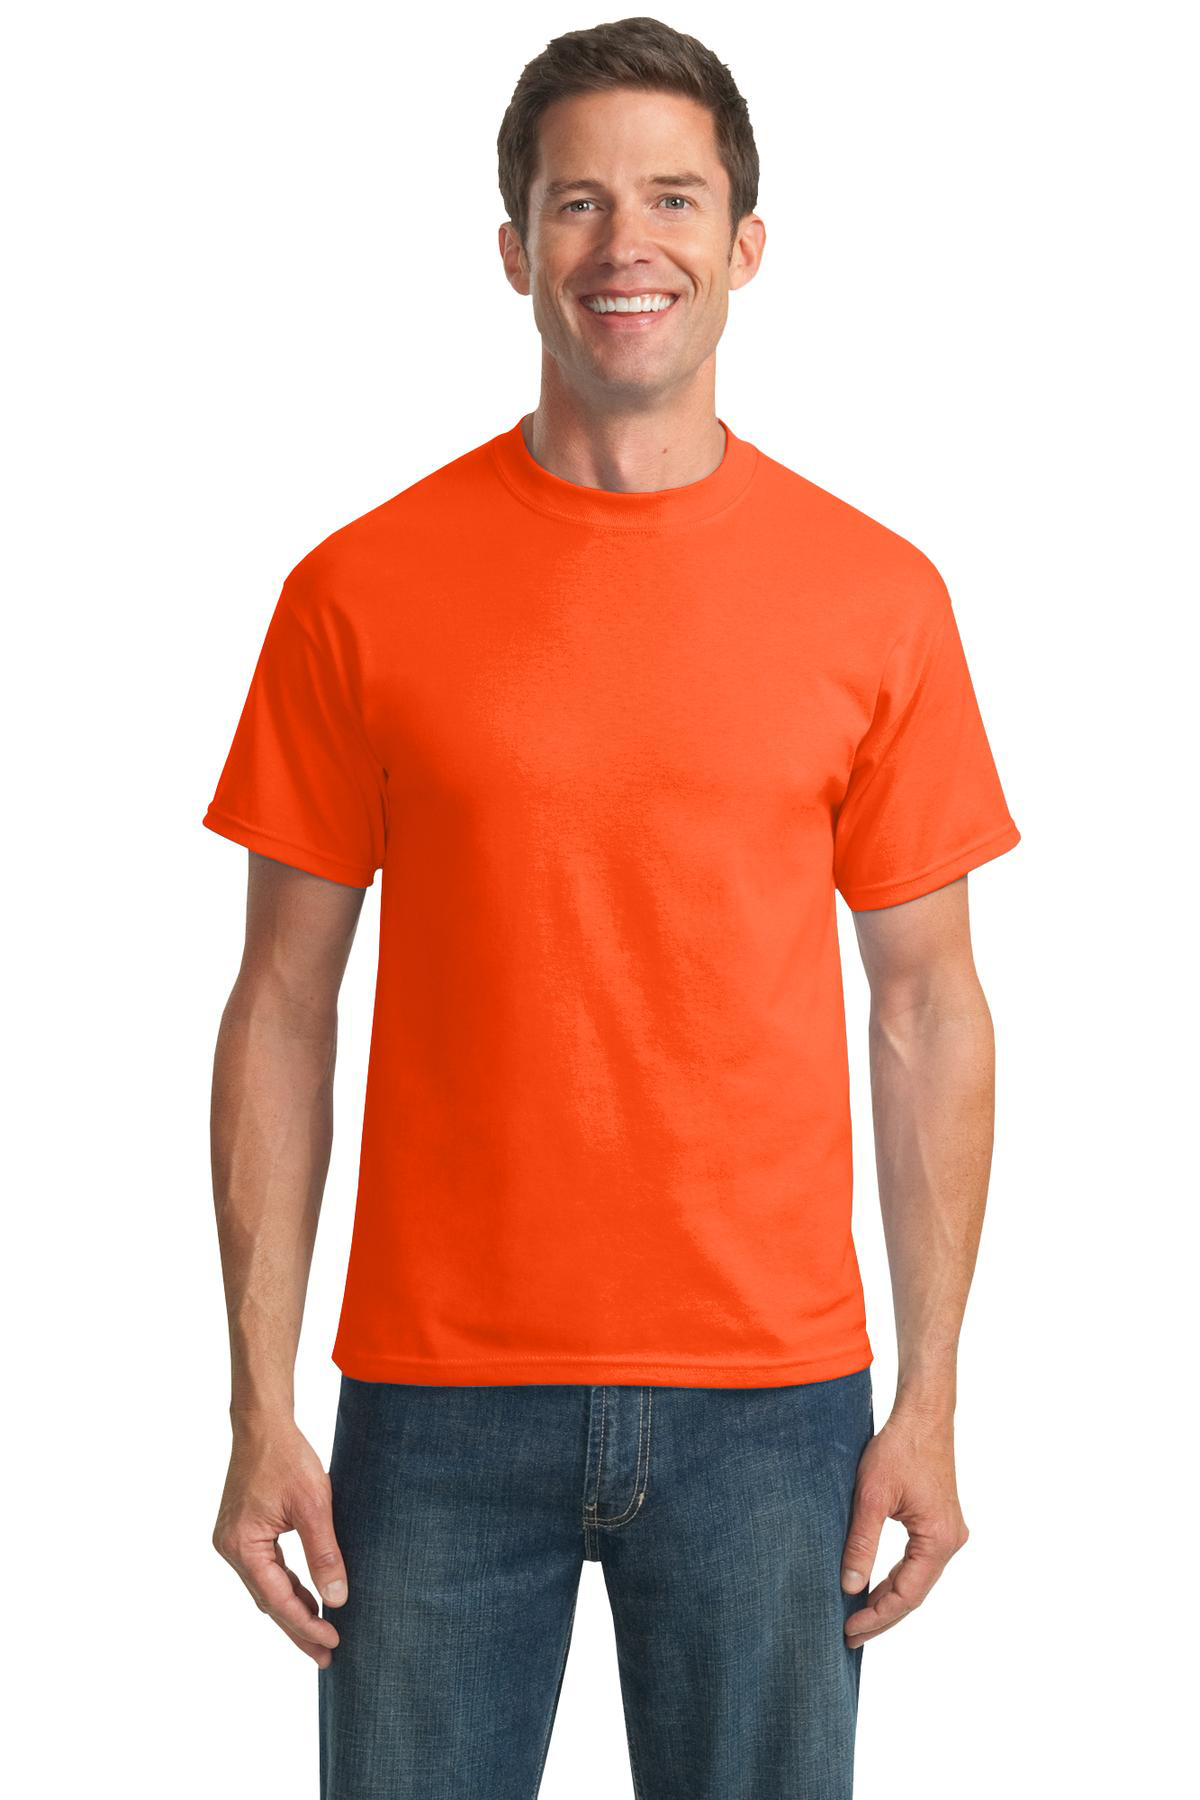 Safety Orange Port & Company Tall 50/50 Cotton/Poly T-Shirt with Pocket ...